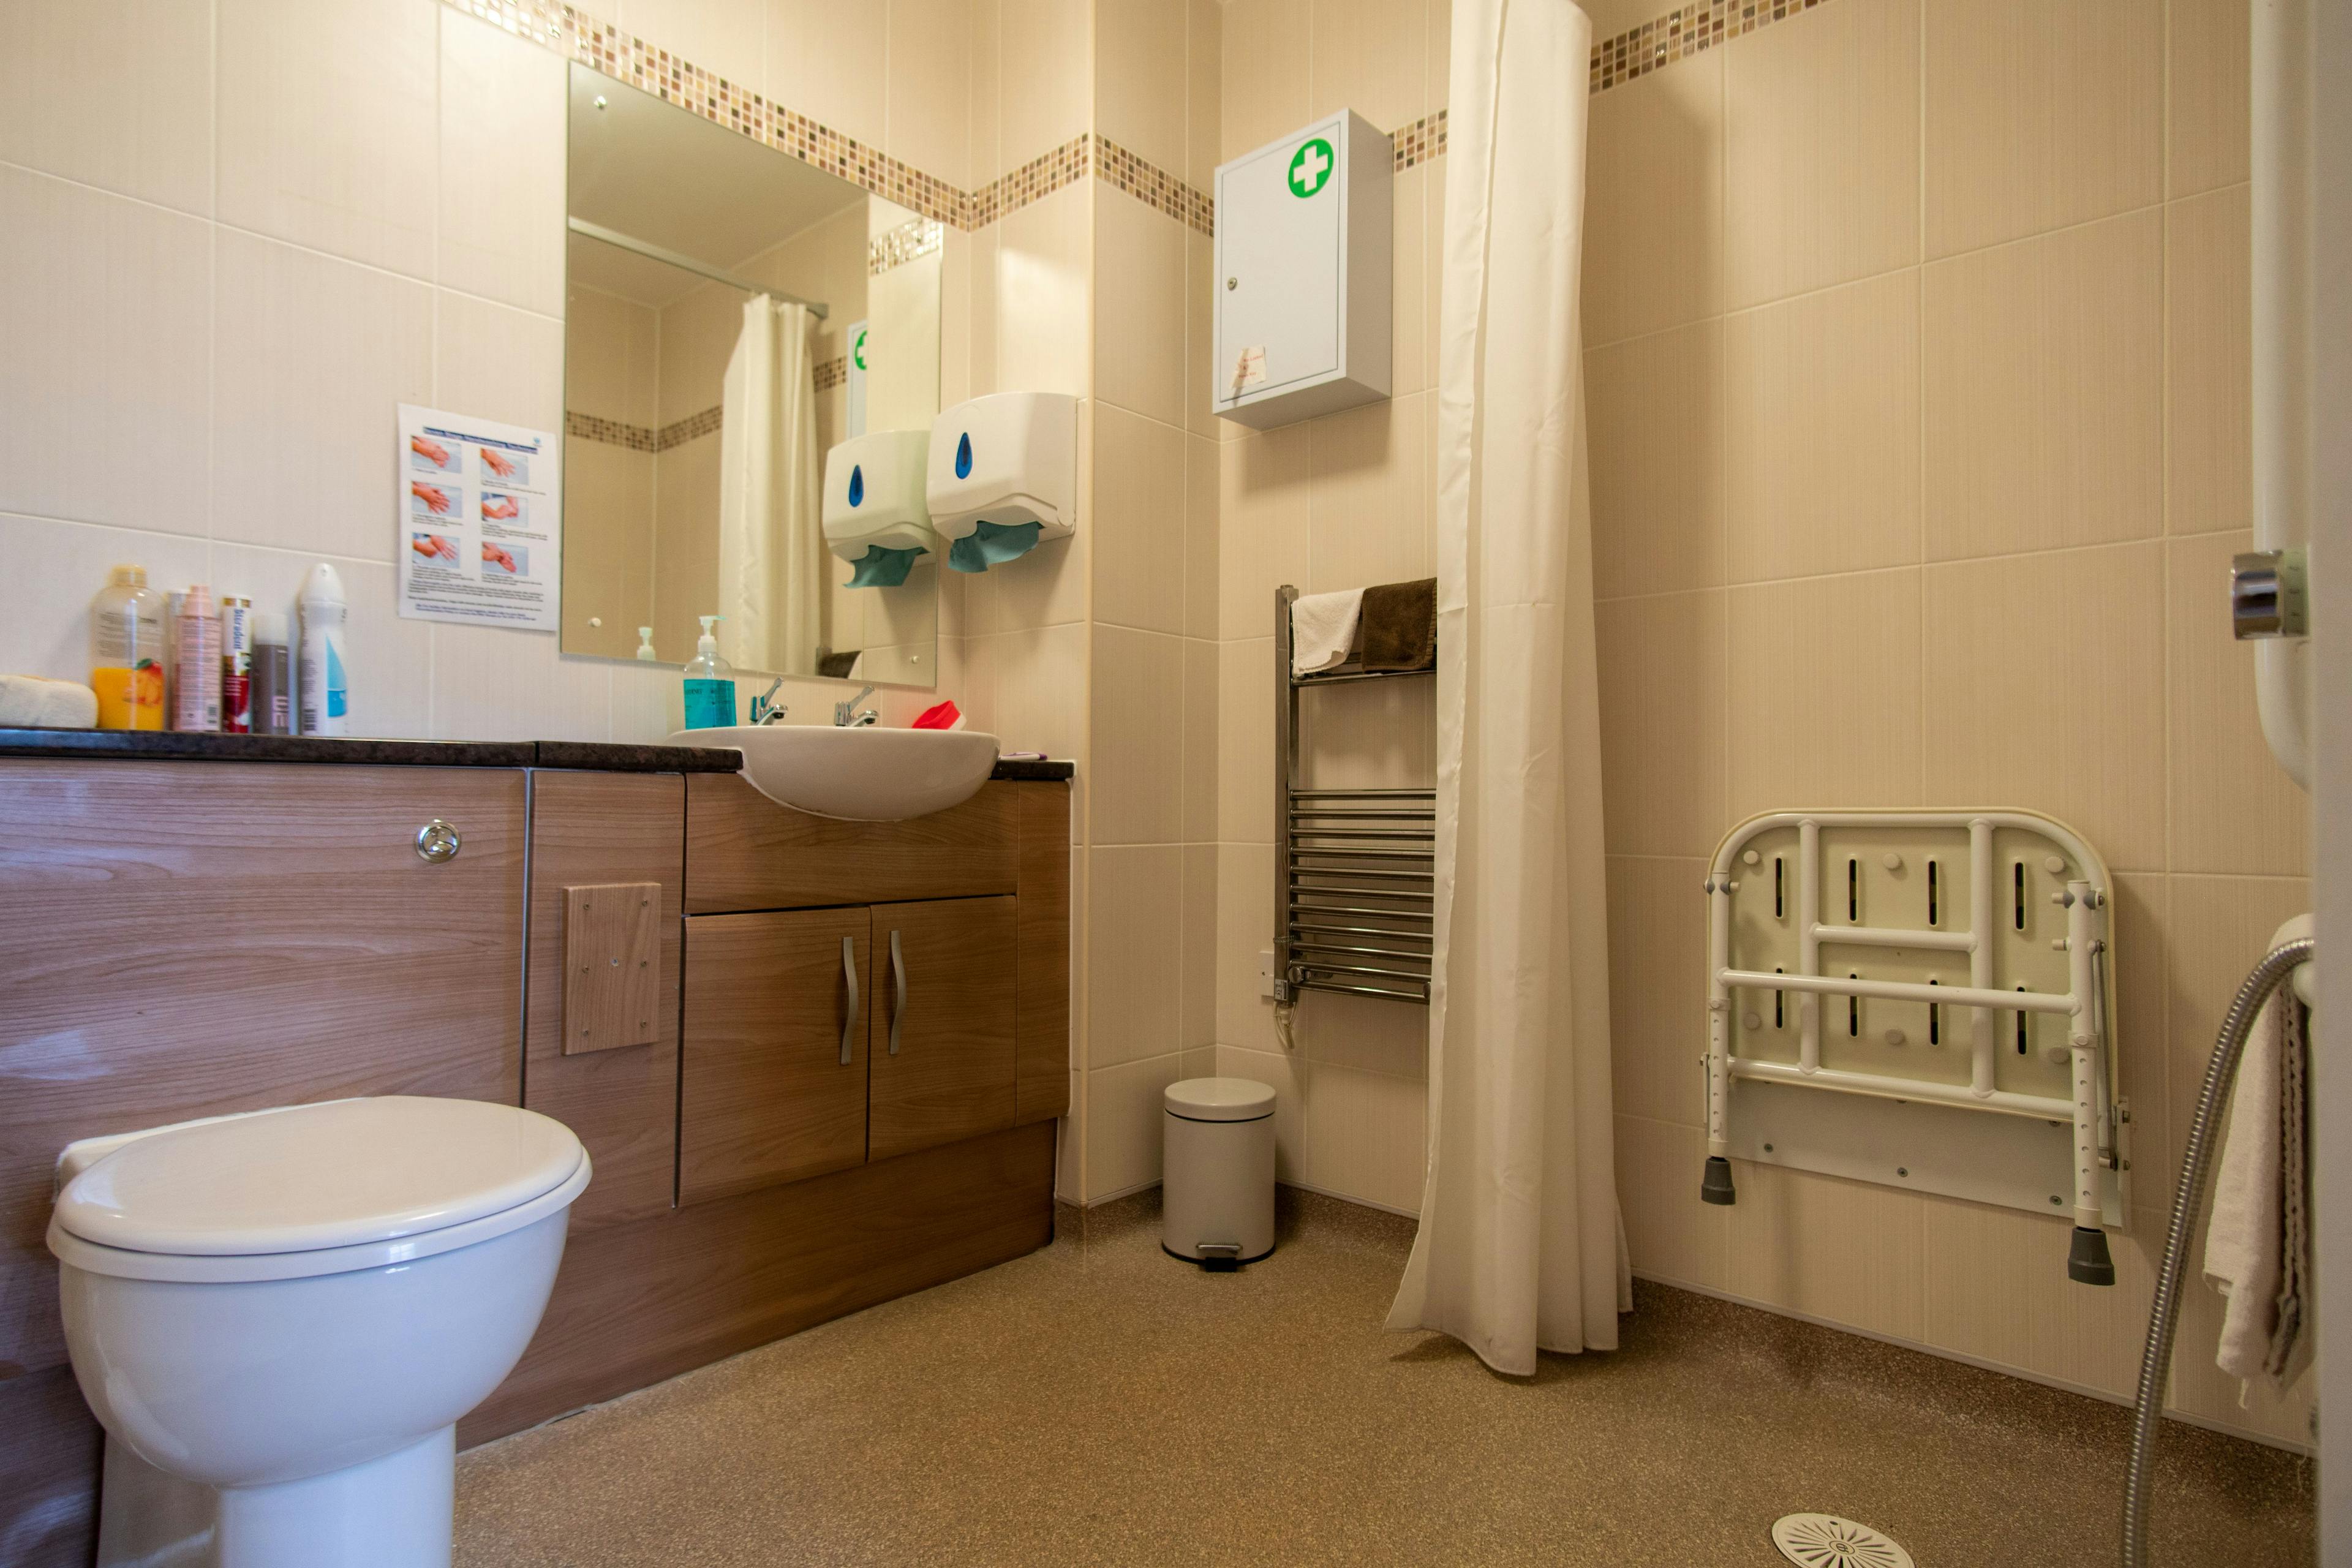 Bathroom at Stones Wood Care Home in Oldham, Greater Manchester